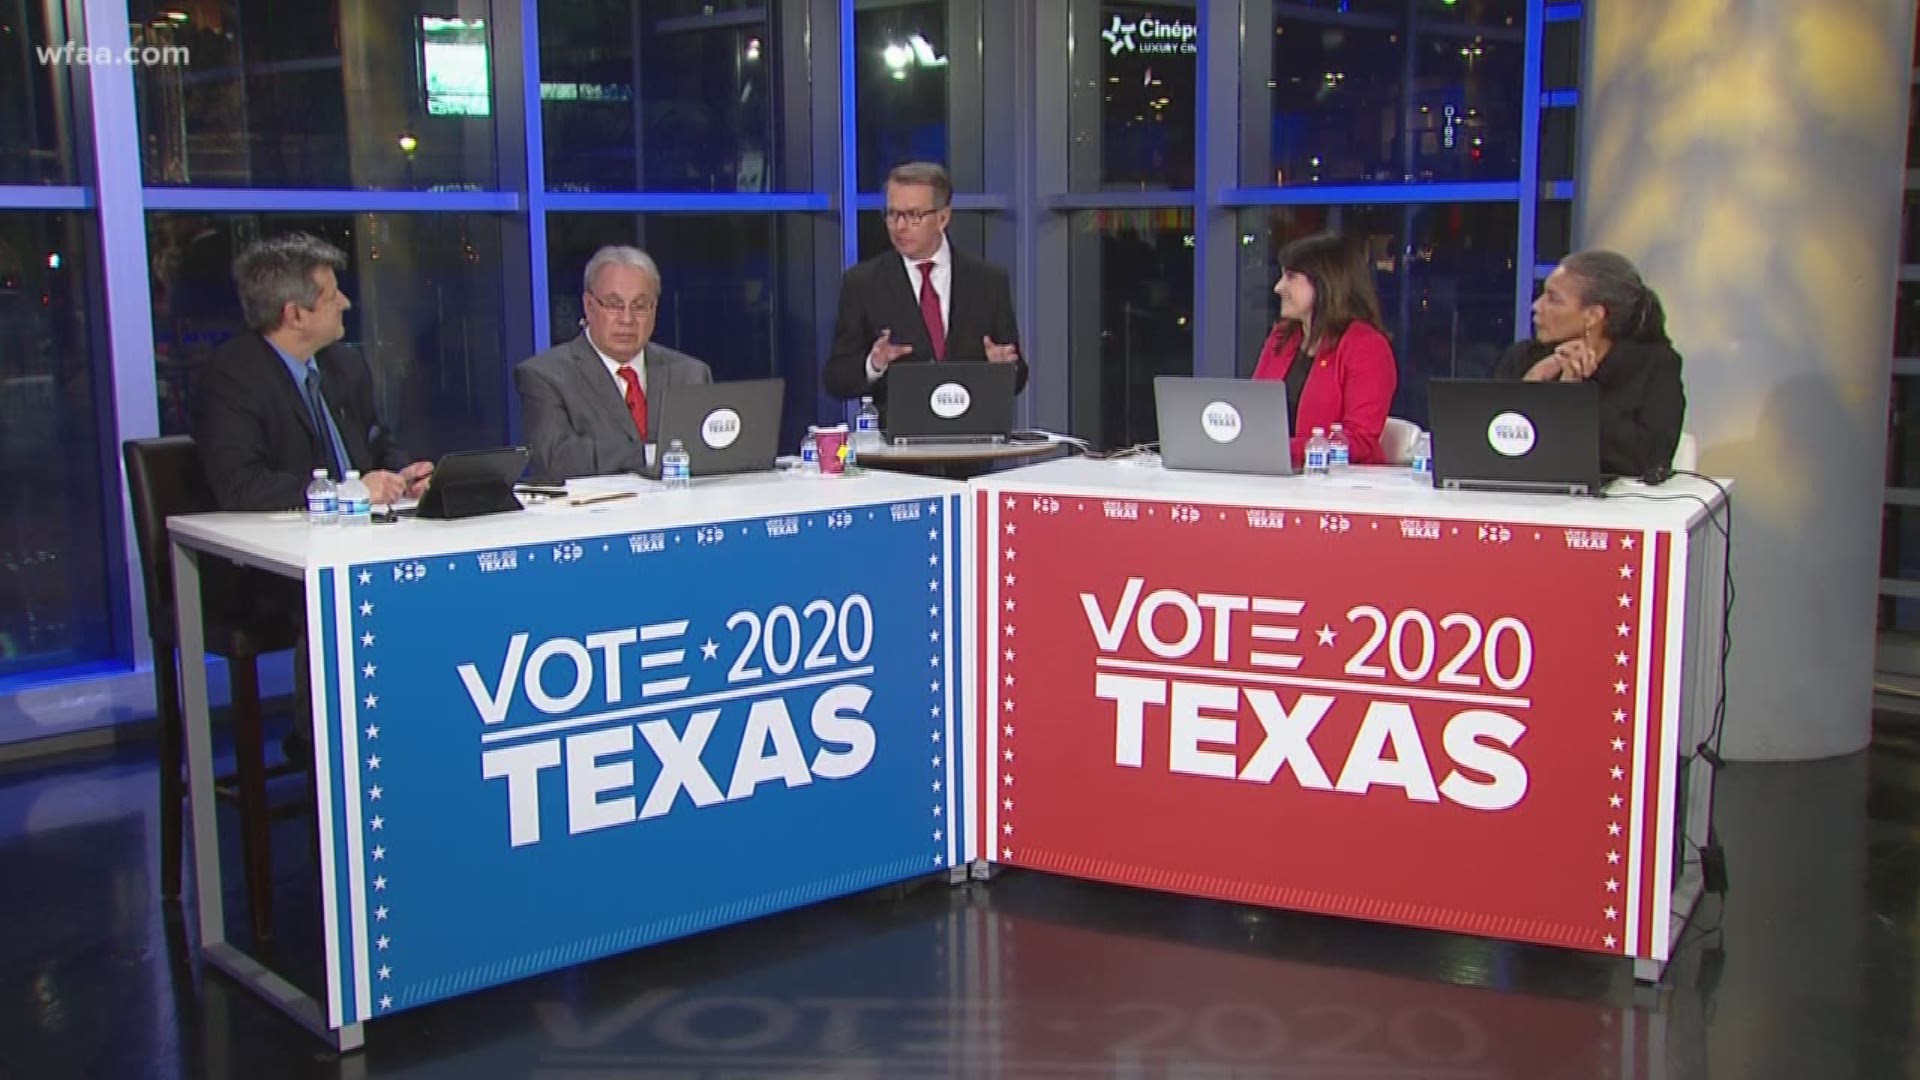 The Democratic U.S. Senate race in Texas is among the biggest races on Tuesday in Dallas-Fort Worth.